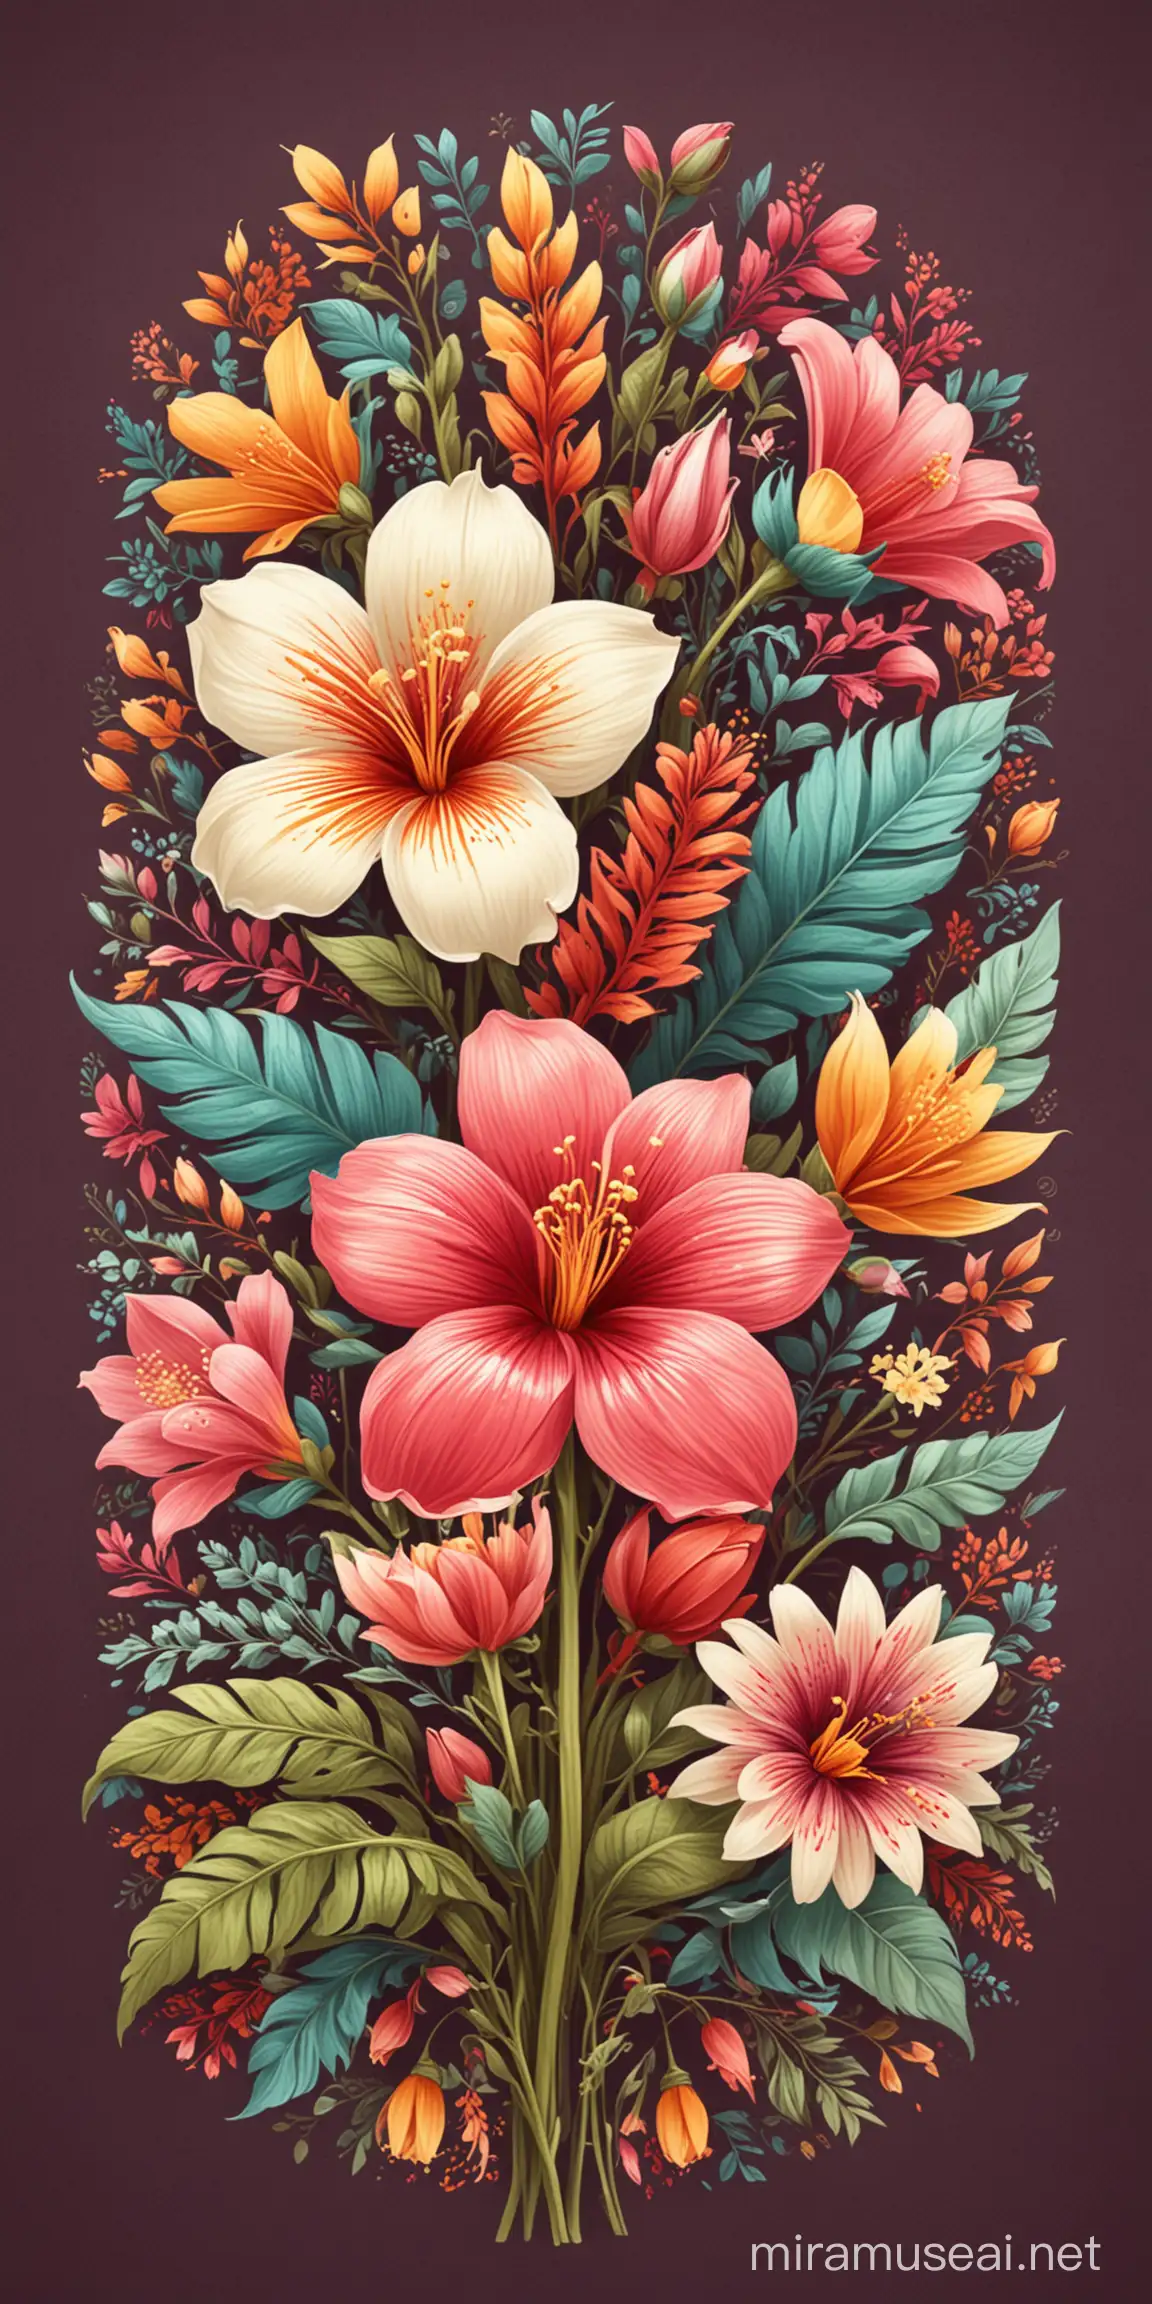 Vibrant PeruvianStyle Flower Illustration Bursting Colors and Intricate Patterns